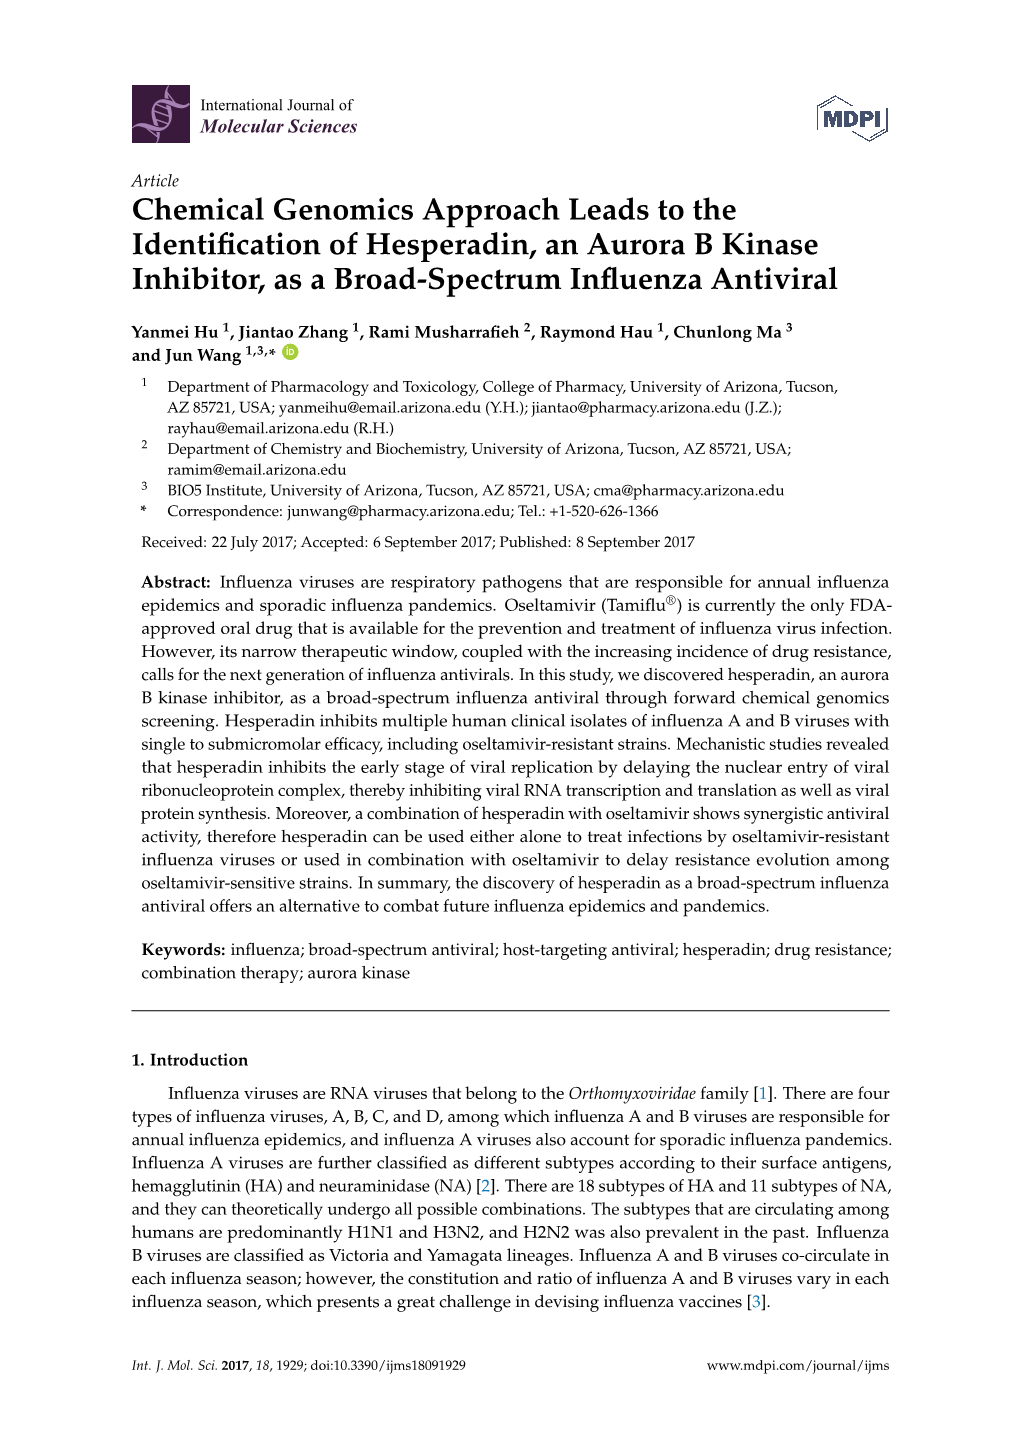 Chemical Genomics Approach Leads to the Identification of Hesperadin, an Aurora B Kinase Inhibitor, As a Broad-Spectrum Influenz